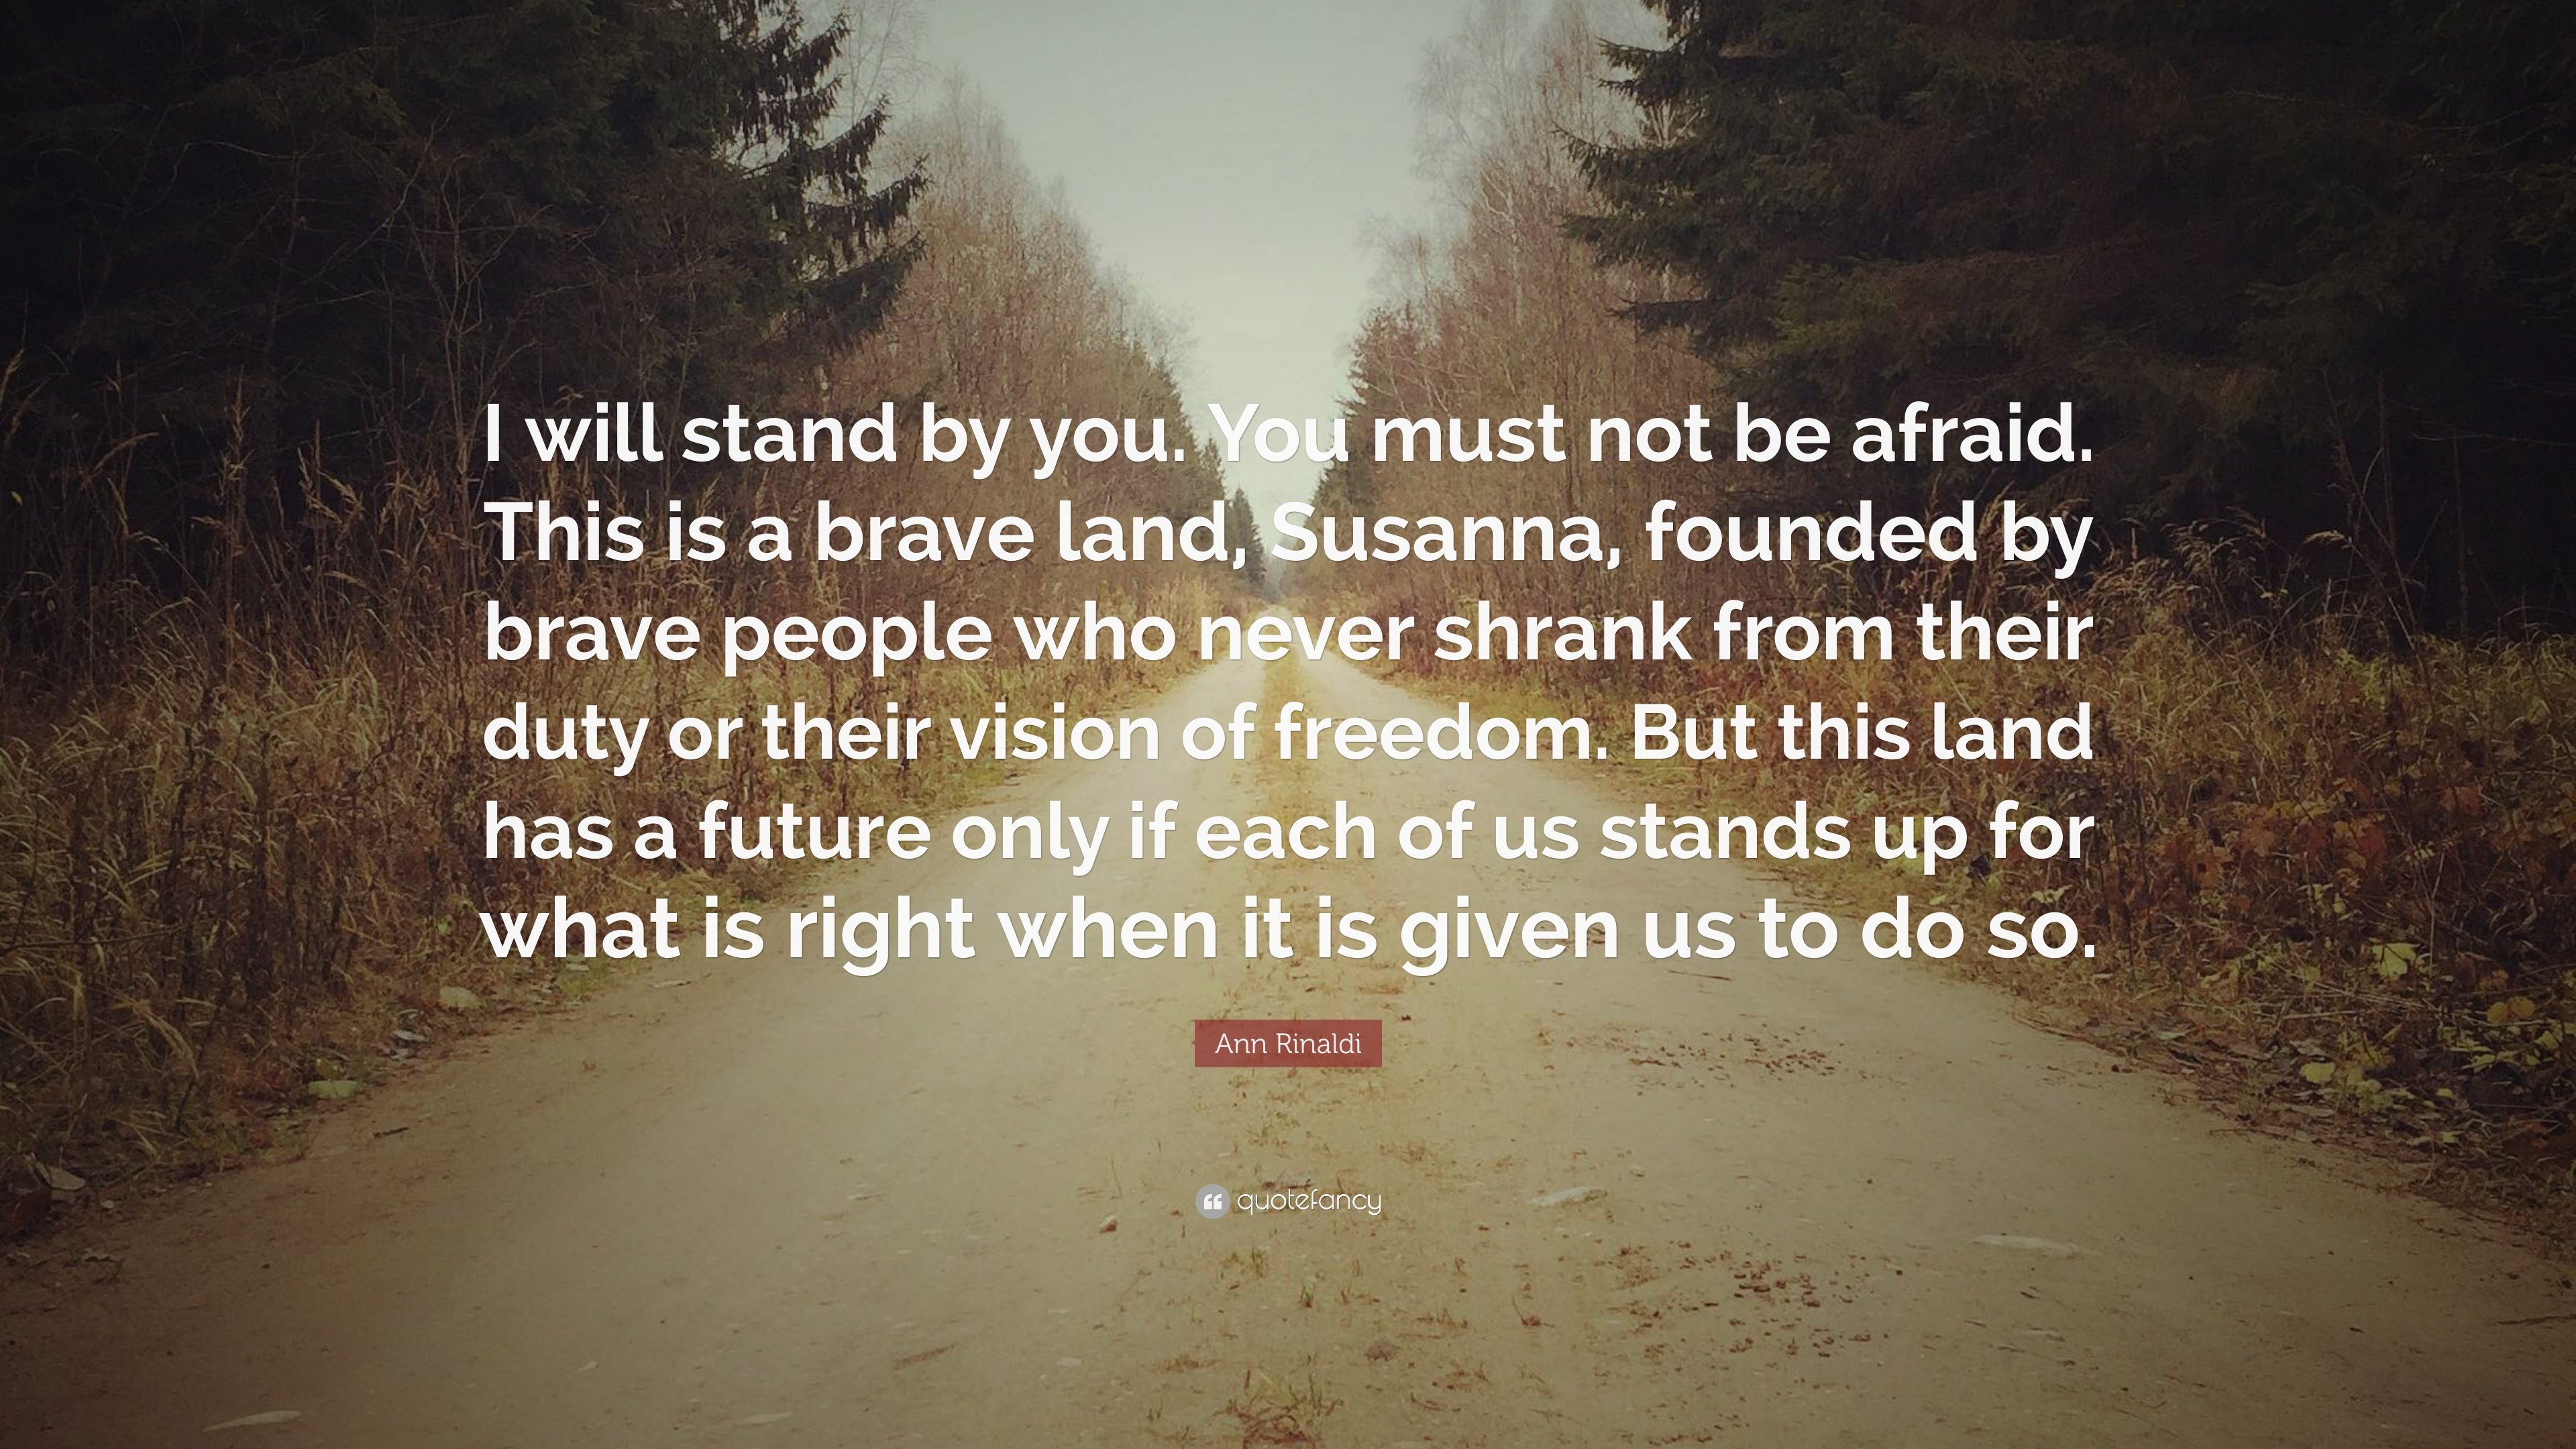 Ann Rinaldi Quote: “I will stand by you. You must not be afraid. This is a brave land, Susanna, founded by brave people who never shrank fro.”